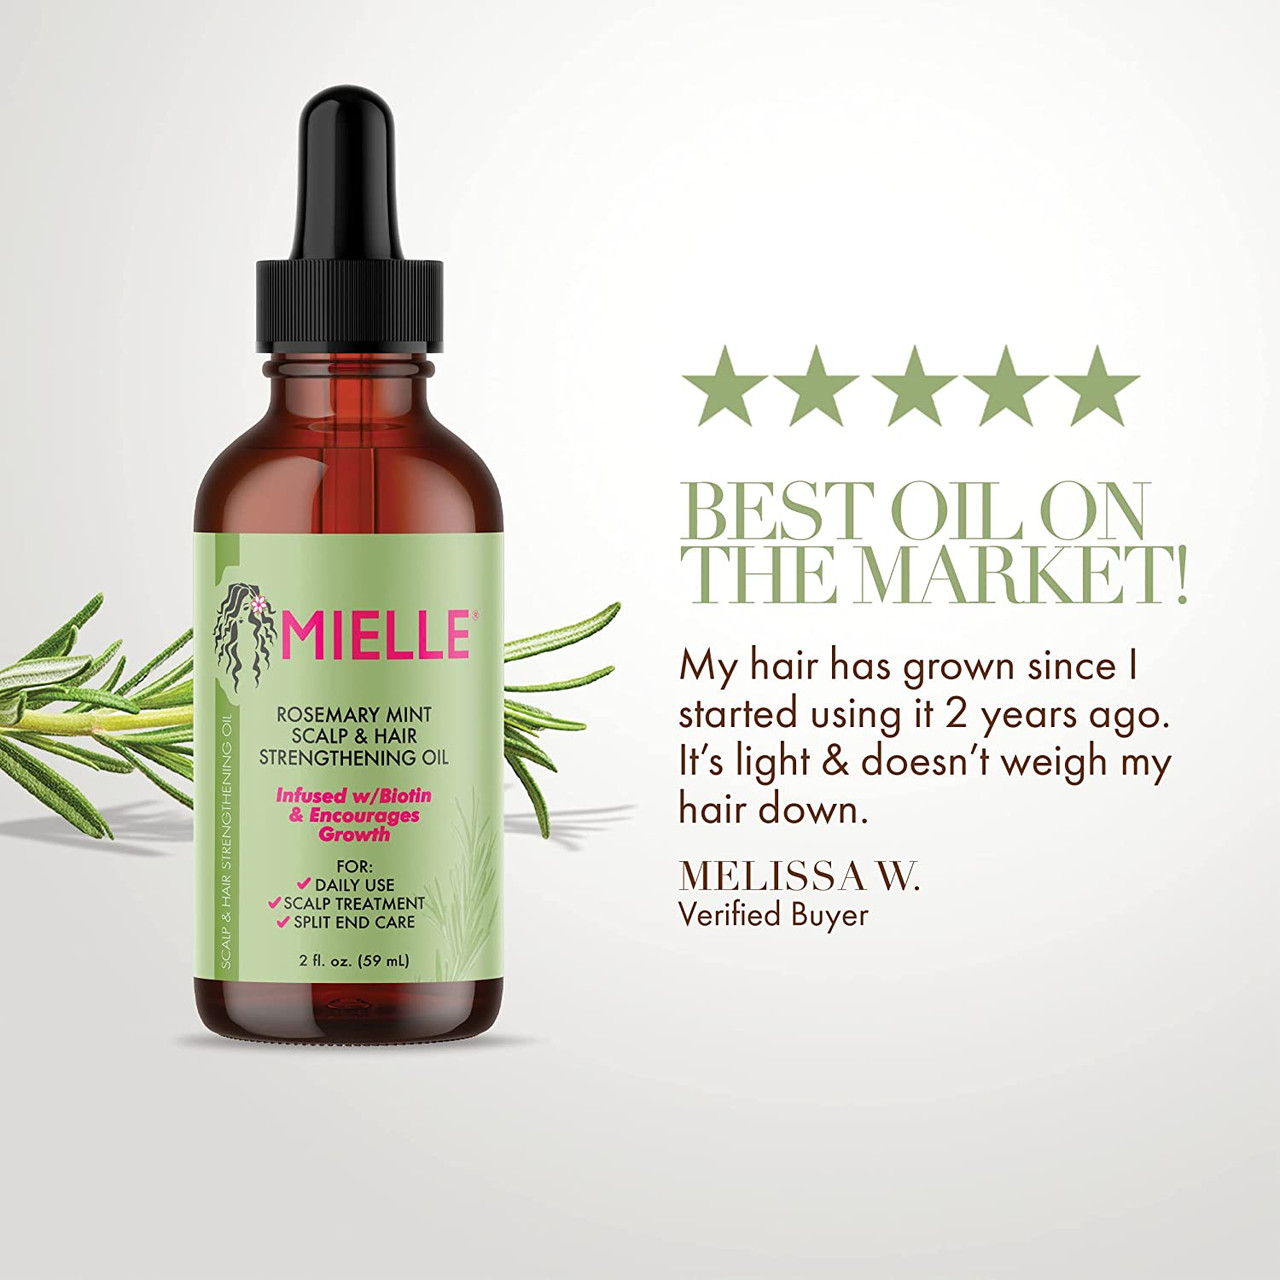 Mielle Organics Rosemary Mint Scalp And Hair Strengthening Oil 2 Oz Naturallycurly 6137